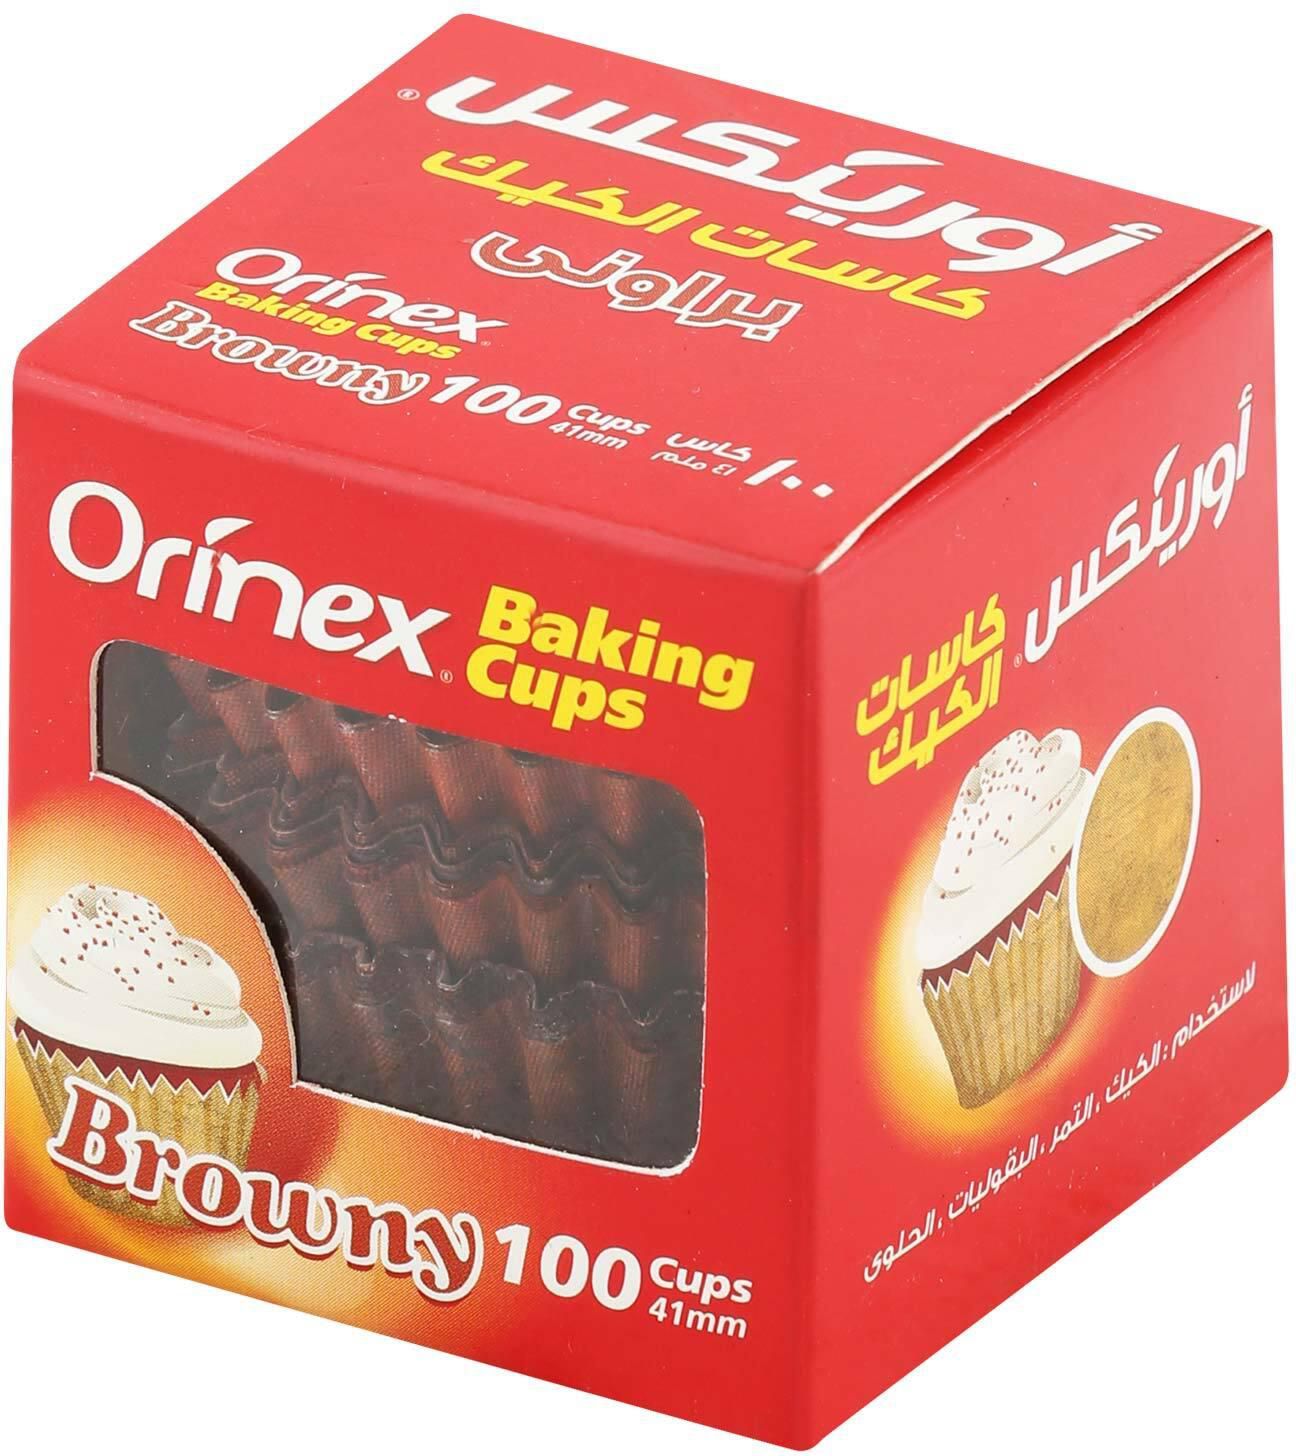 Orinex baking cups Browny 41mm (100cup)